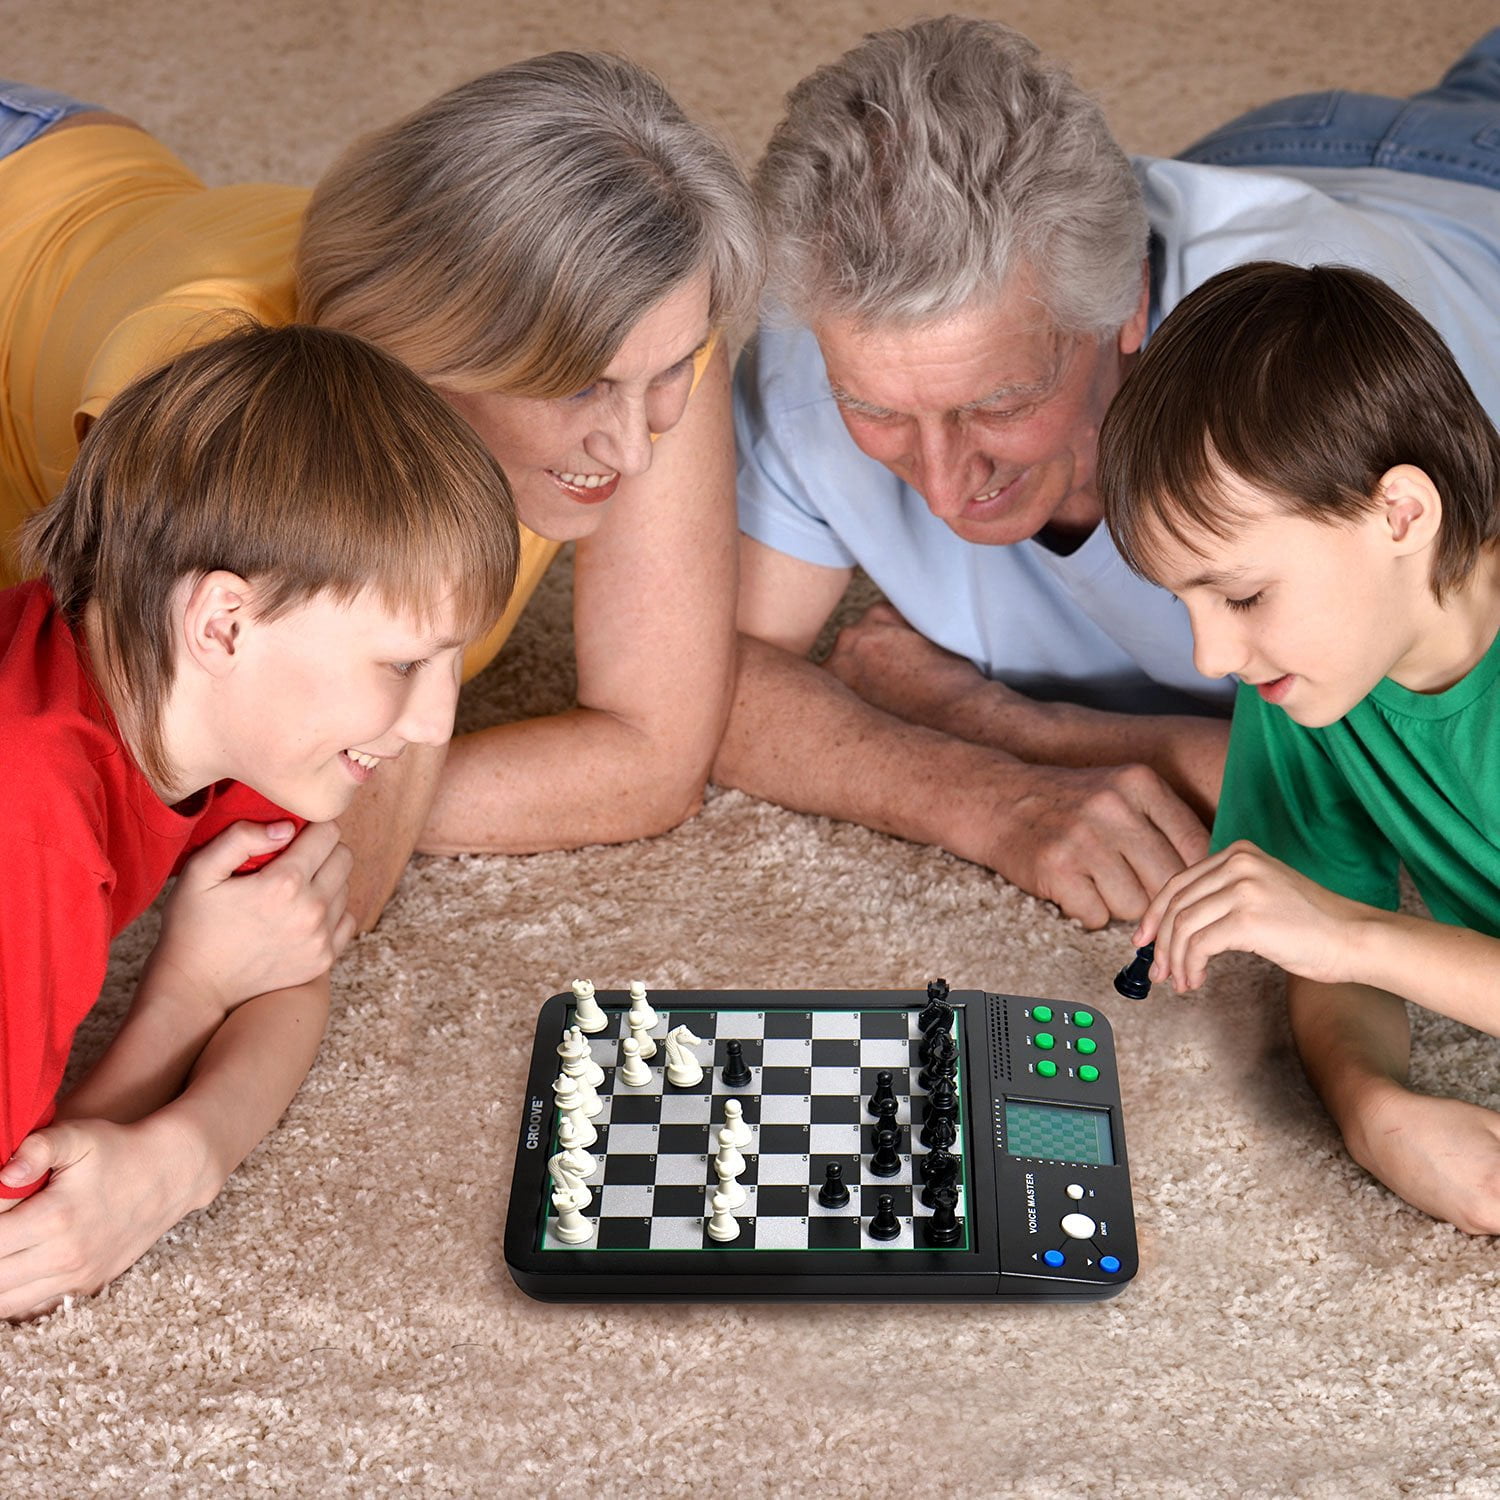 croove electronic chess